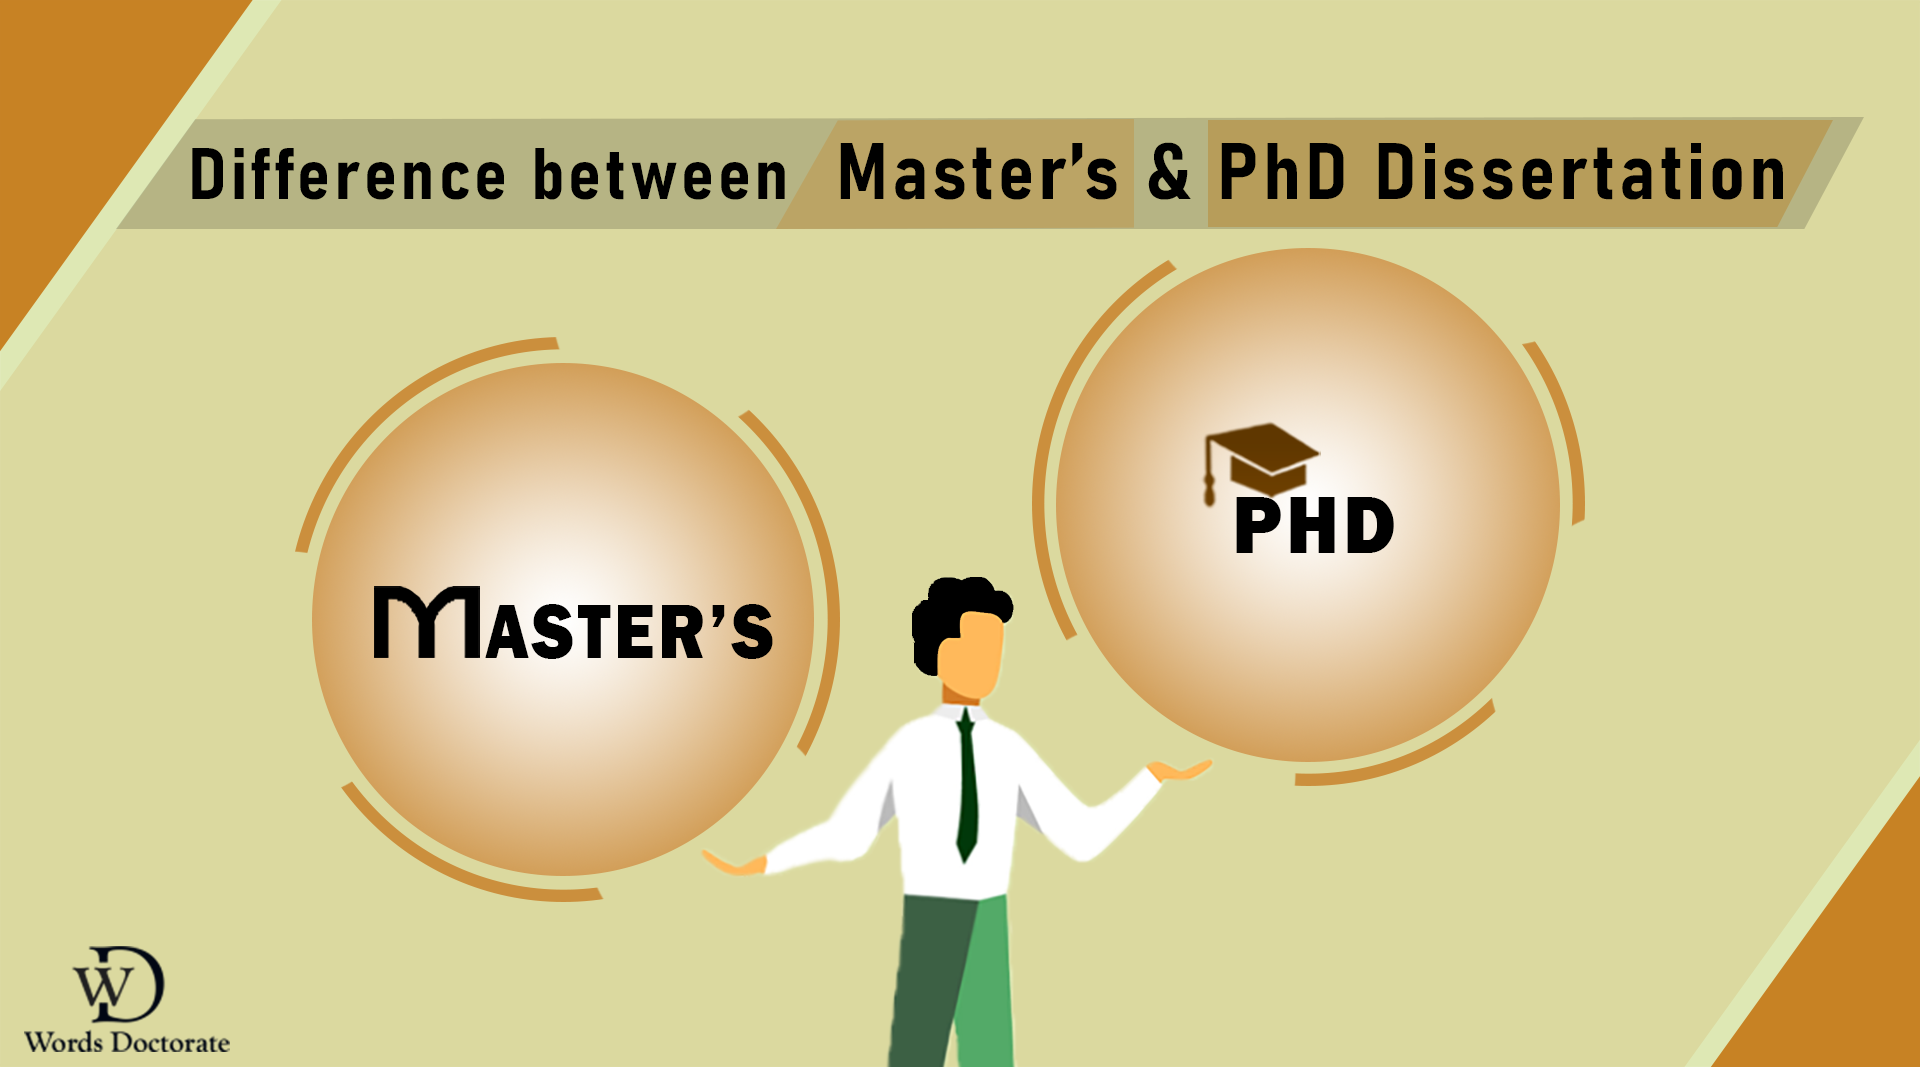 masters research vs phd research